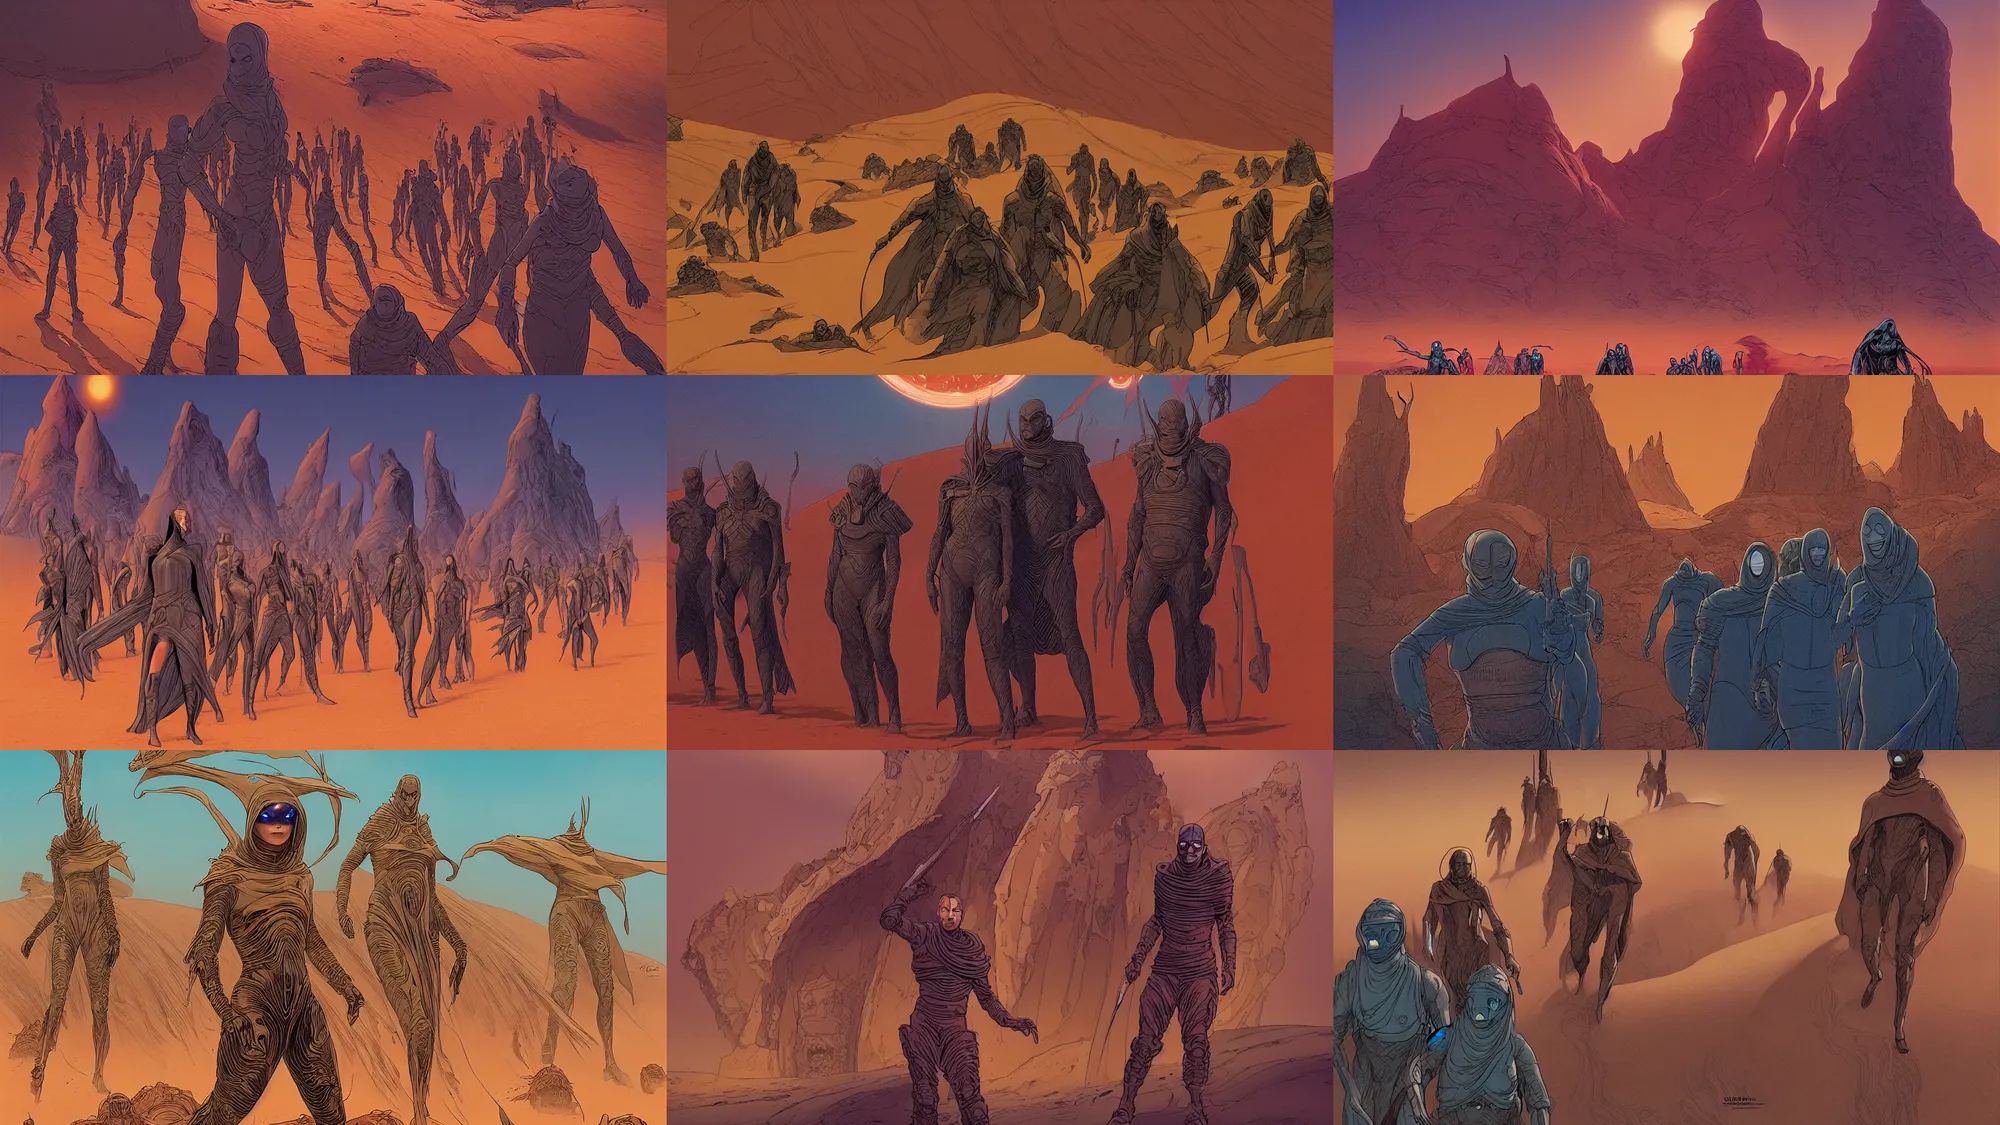 Prompt: dune 2021 by Denis Villeneuve but the Fremen are redesigned to be imaginative creative inhuman aliens by moebius, Jean Giraud, cinematic, widescreen, 4k